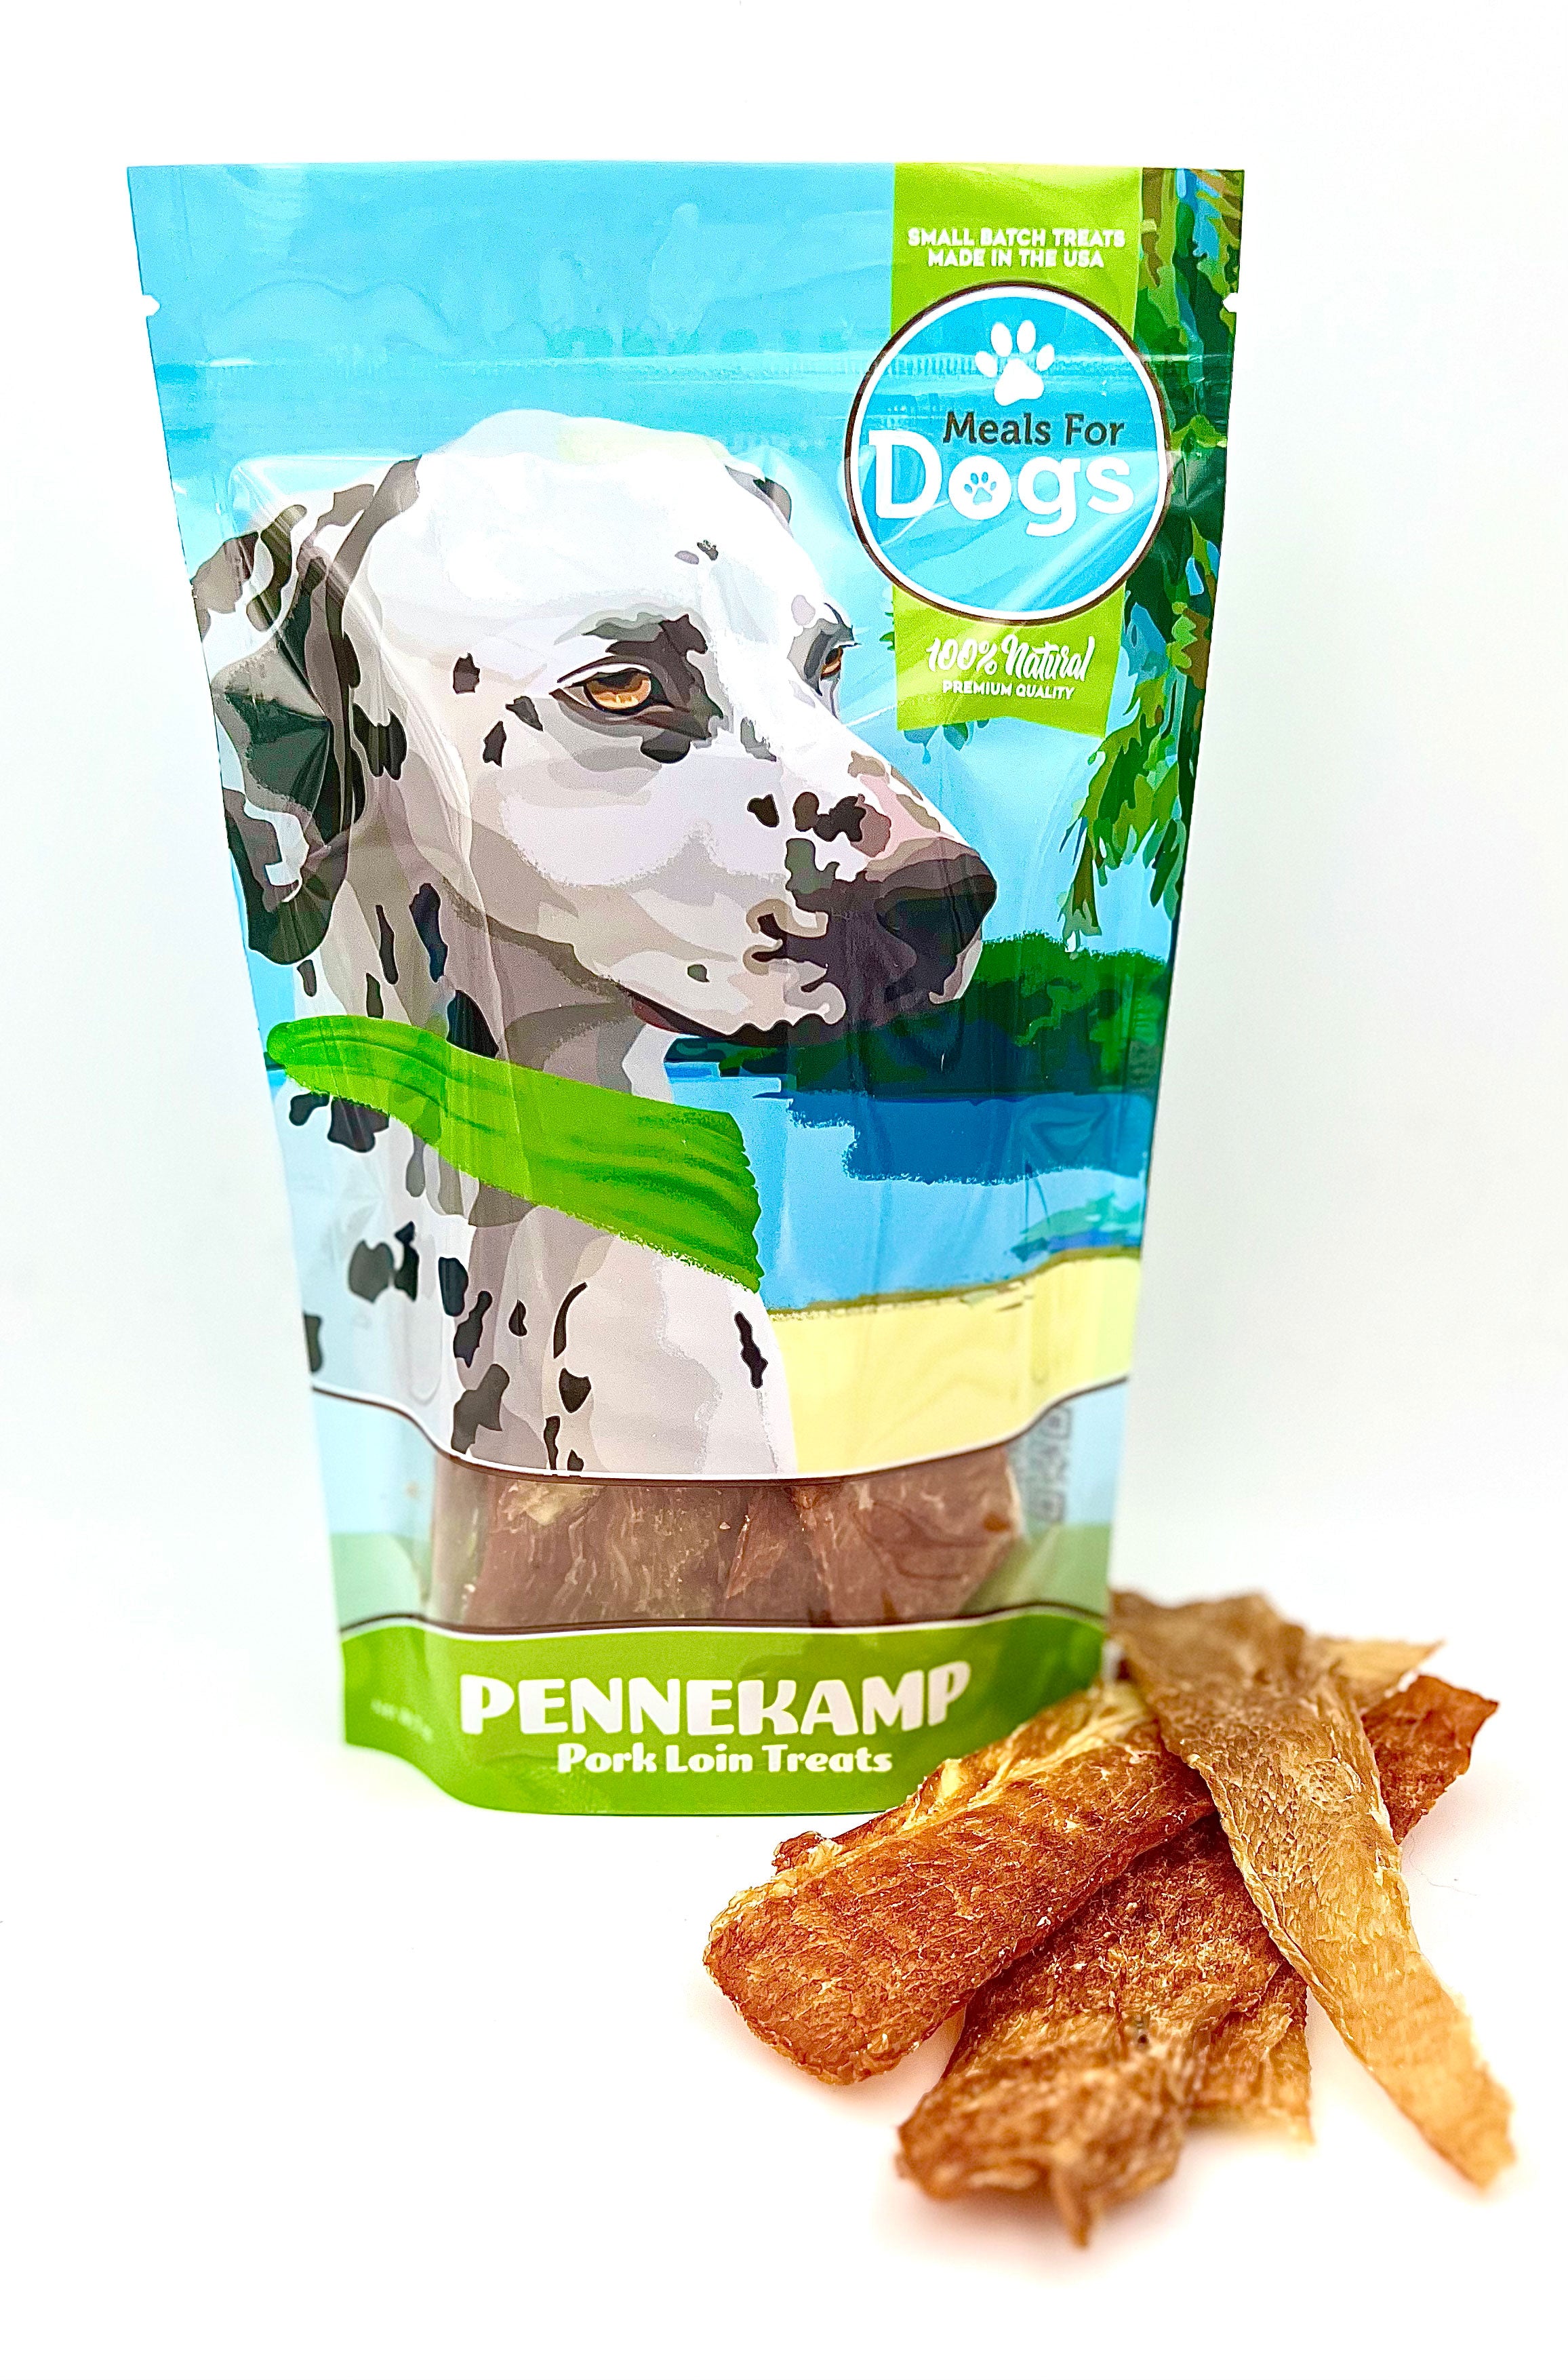 Pennecamp Pork Loin Treats | Meals for Dogs